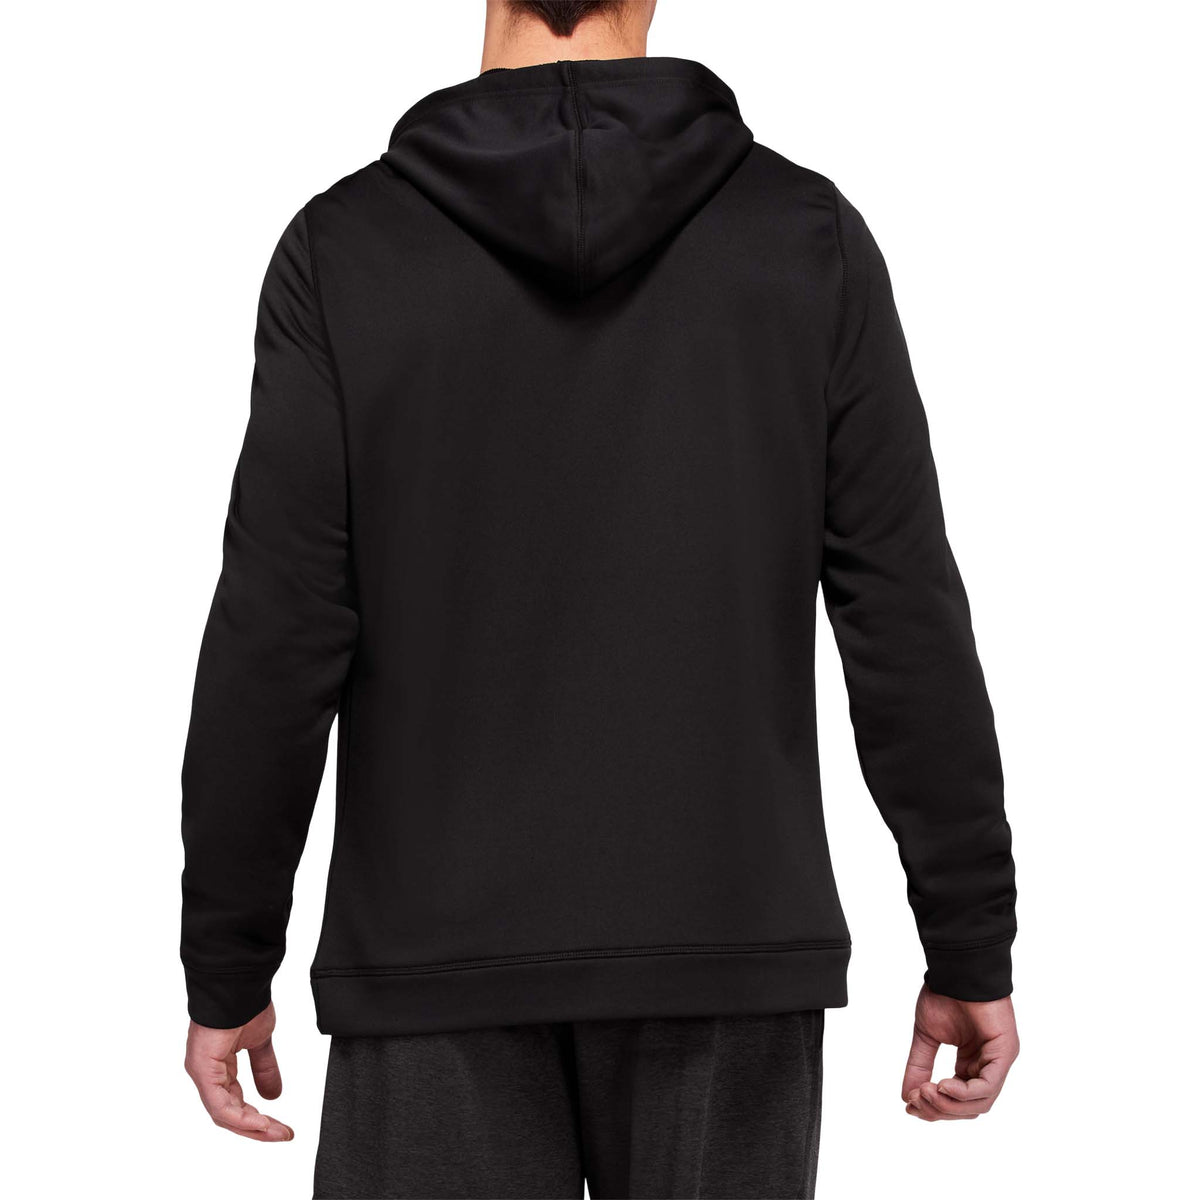 ASICS French Terry Hoodie chandail noir homme dos